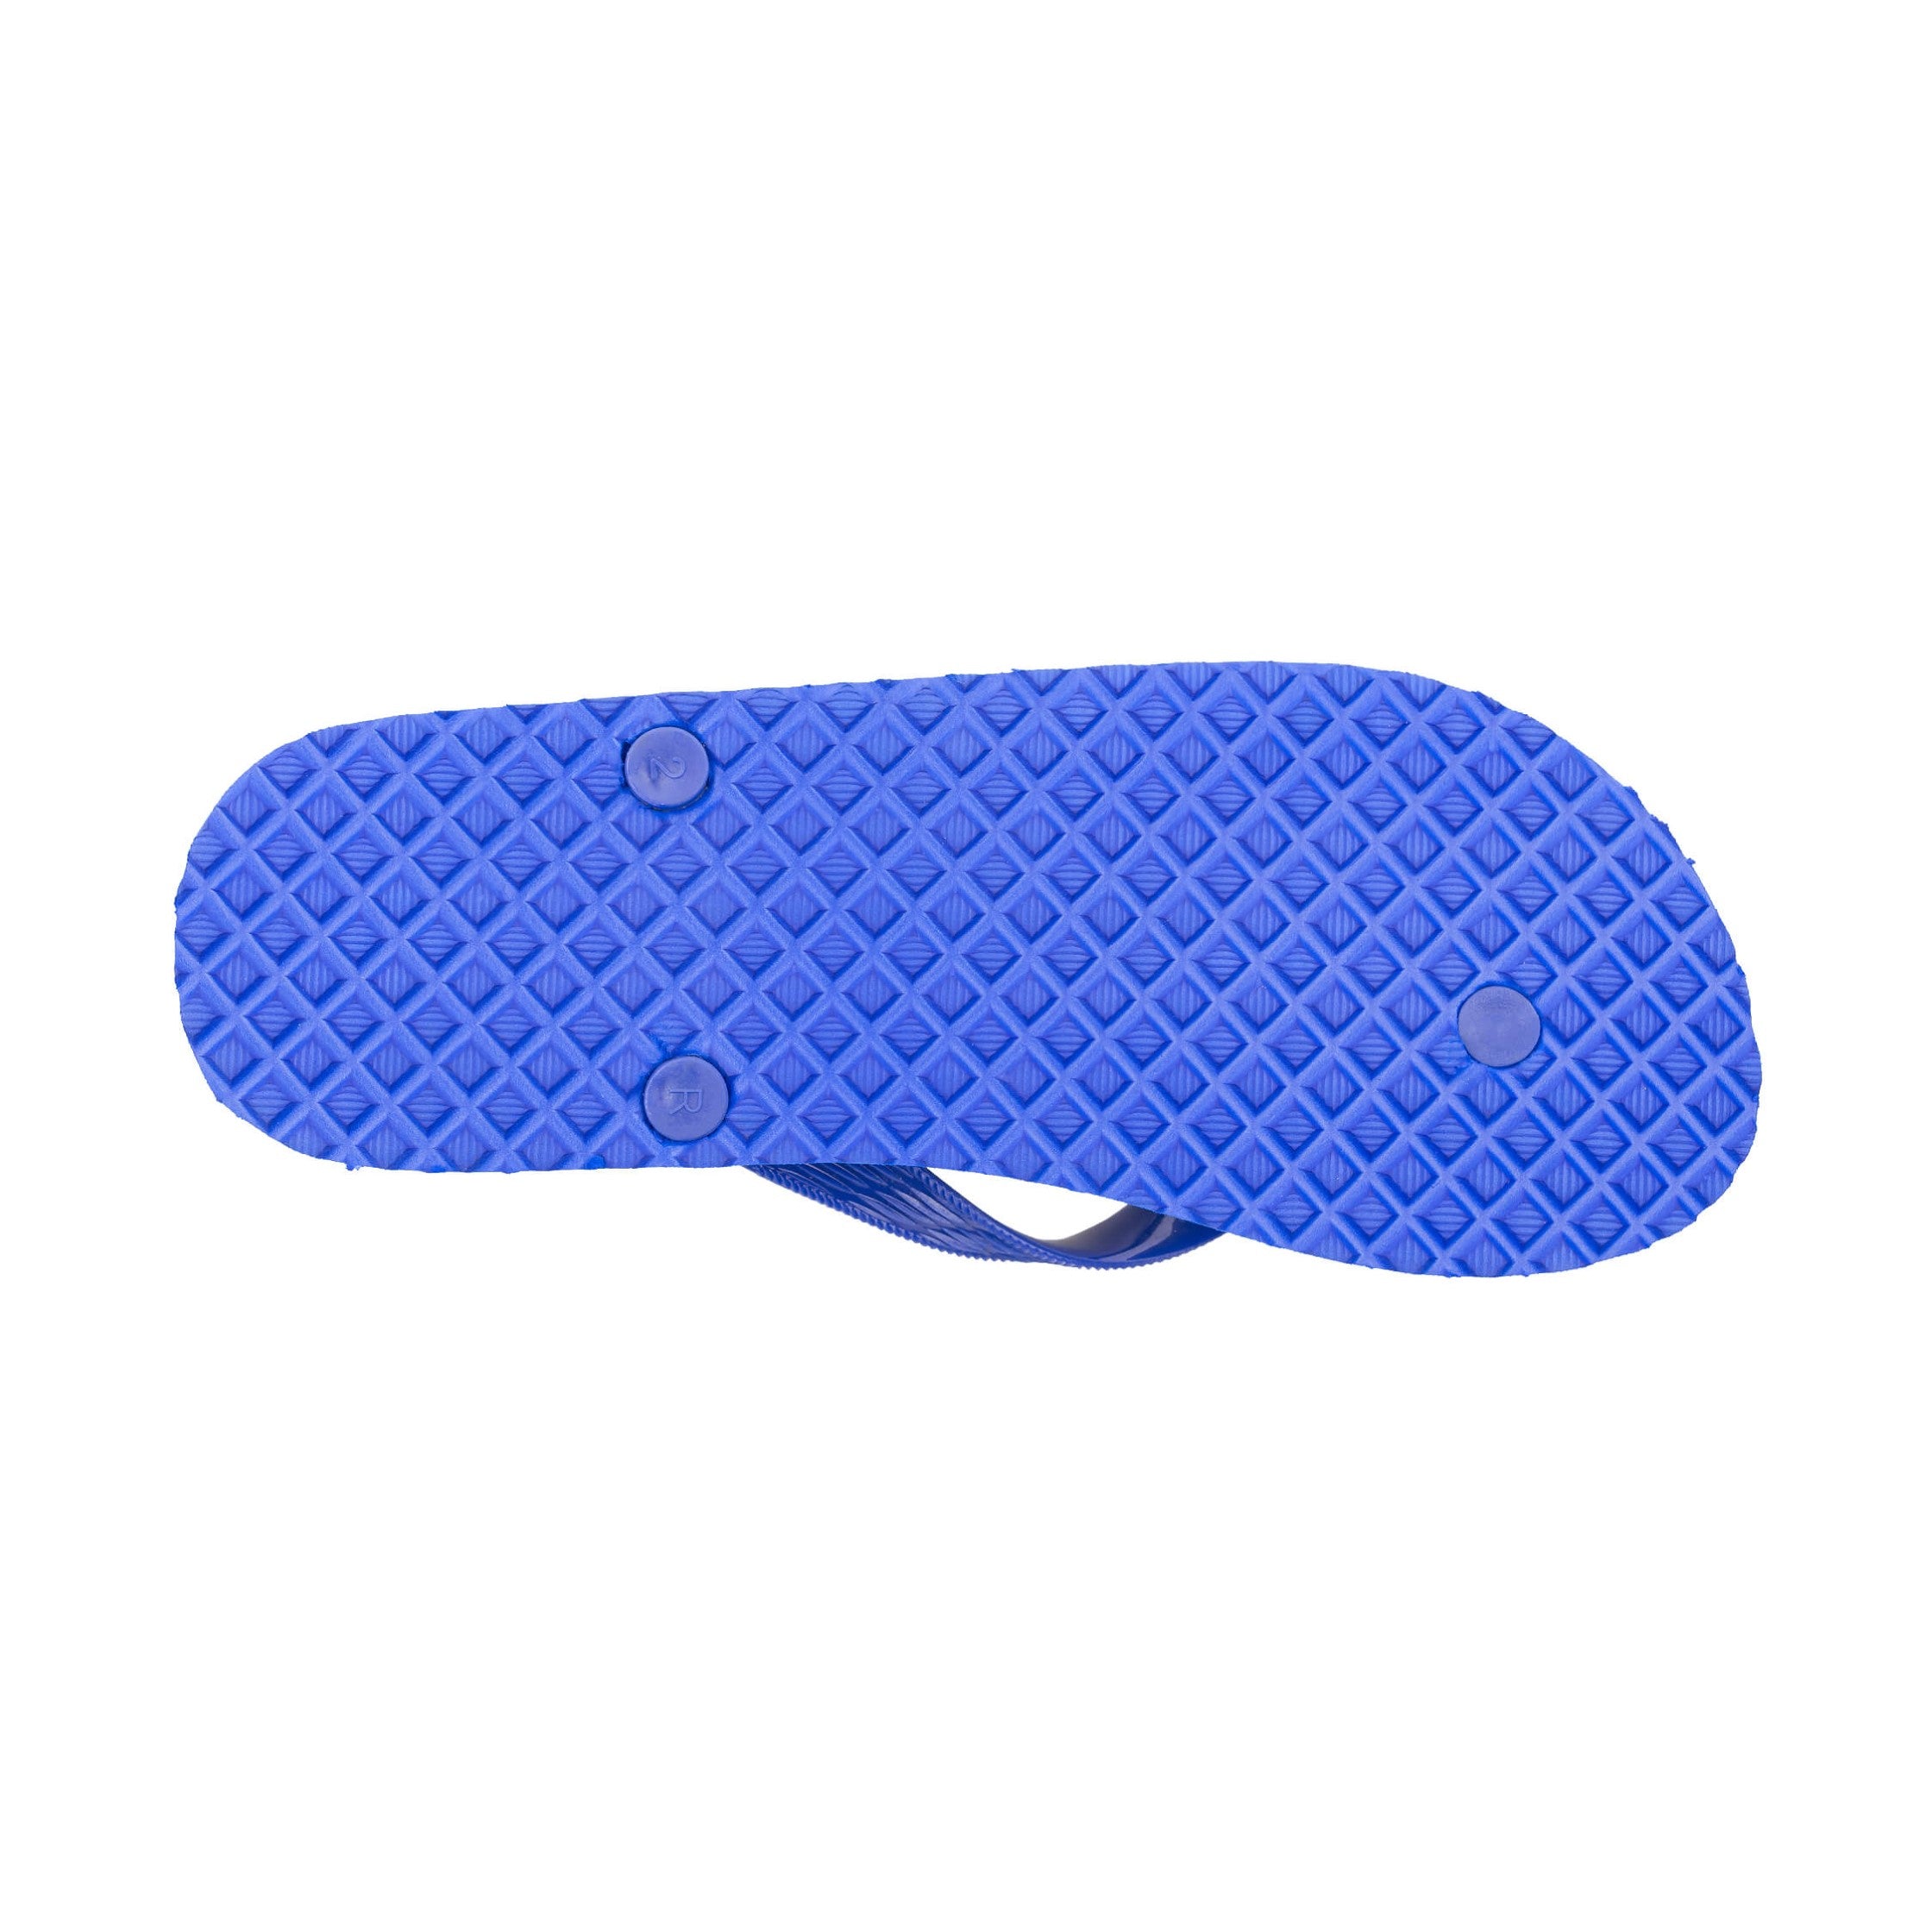 Locals Unisex Stripe Blue II Flip Flops featuring a Black/Blue platform with a White stripe and a Solid Blue strap.